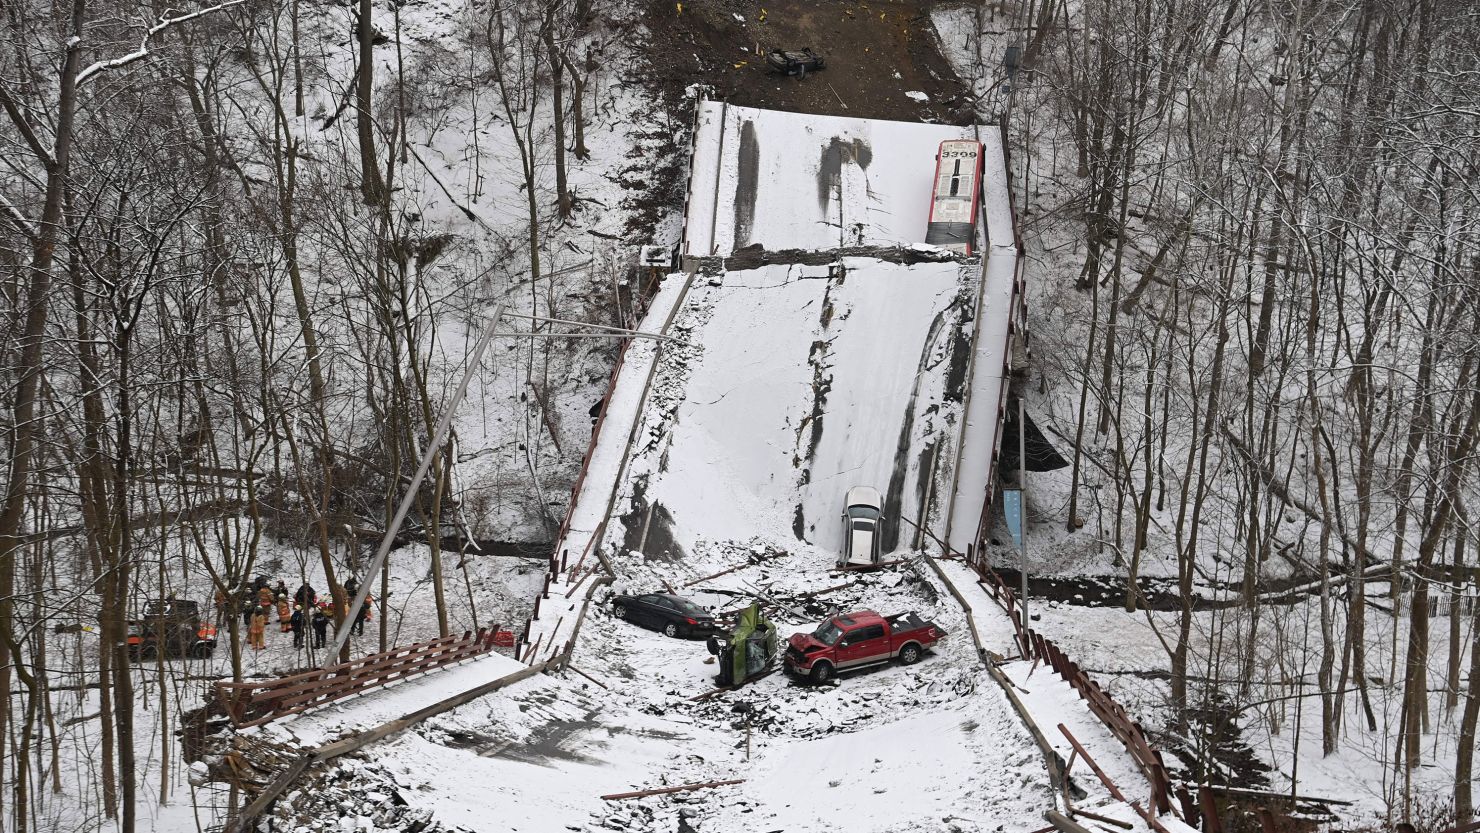 The Fern Hollow Bridge collapsed in Pittsburgh on January 28, 2022.